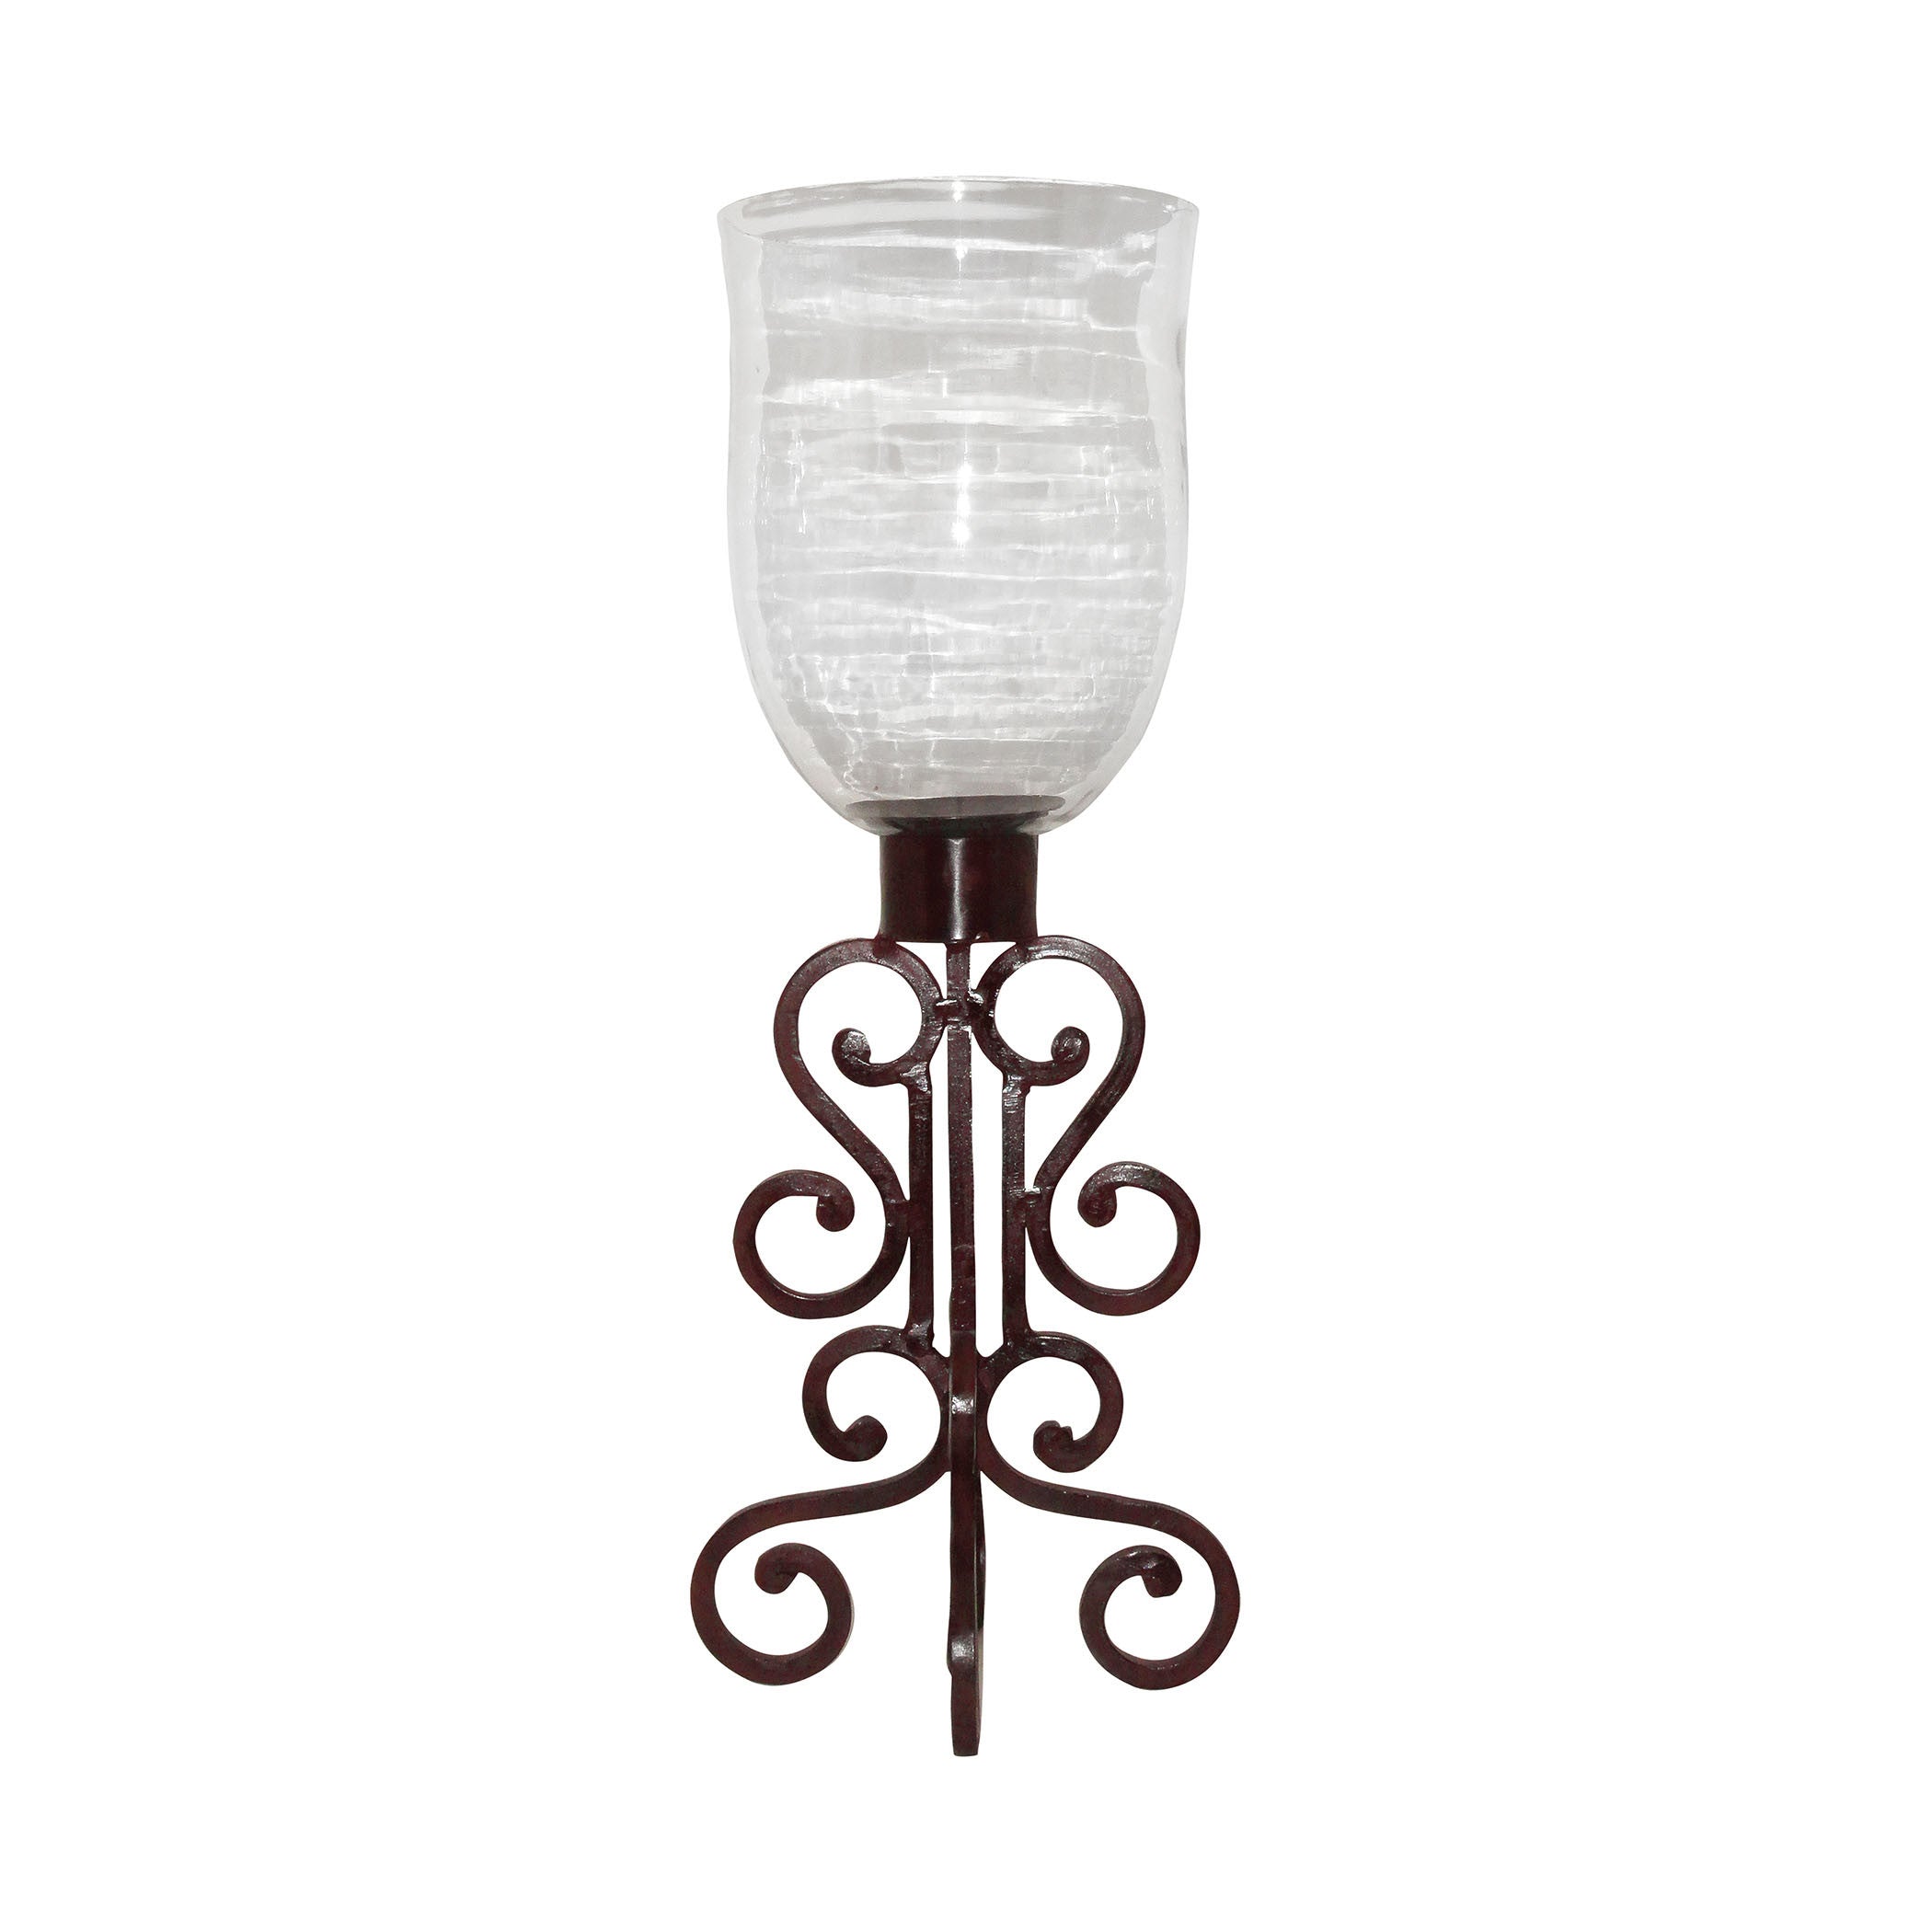 Pomeroy Pom-615627 Prairie Collection Montana Rustic,clear Finish Candle/candle Holder